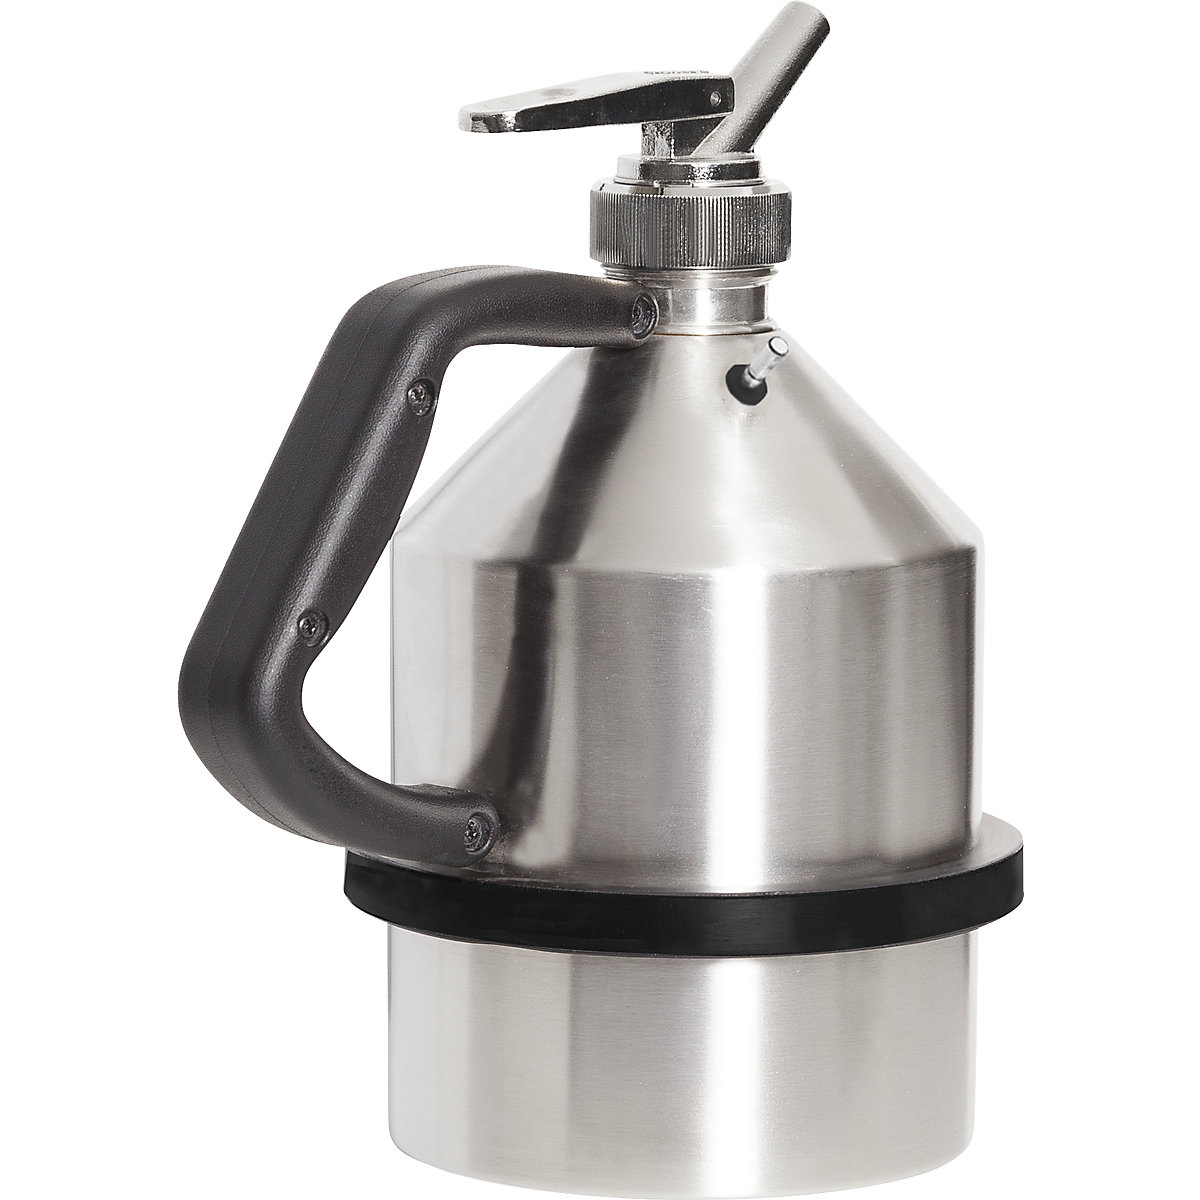 Stainless steel safety dispensing container - FALCON